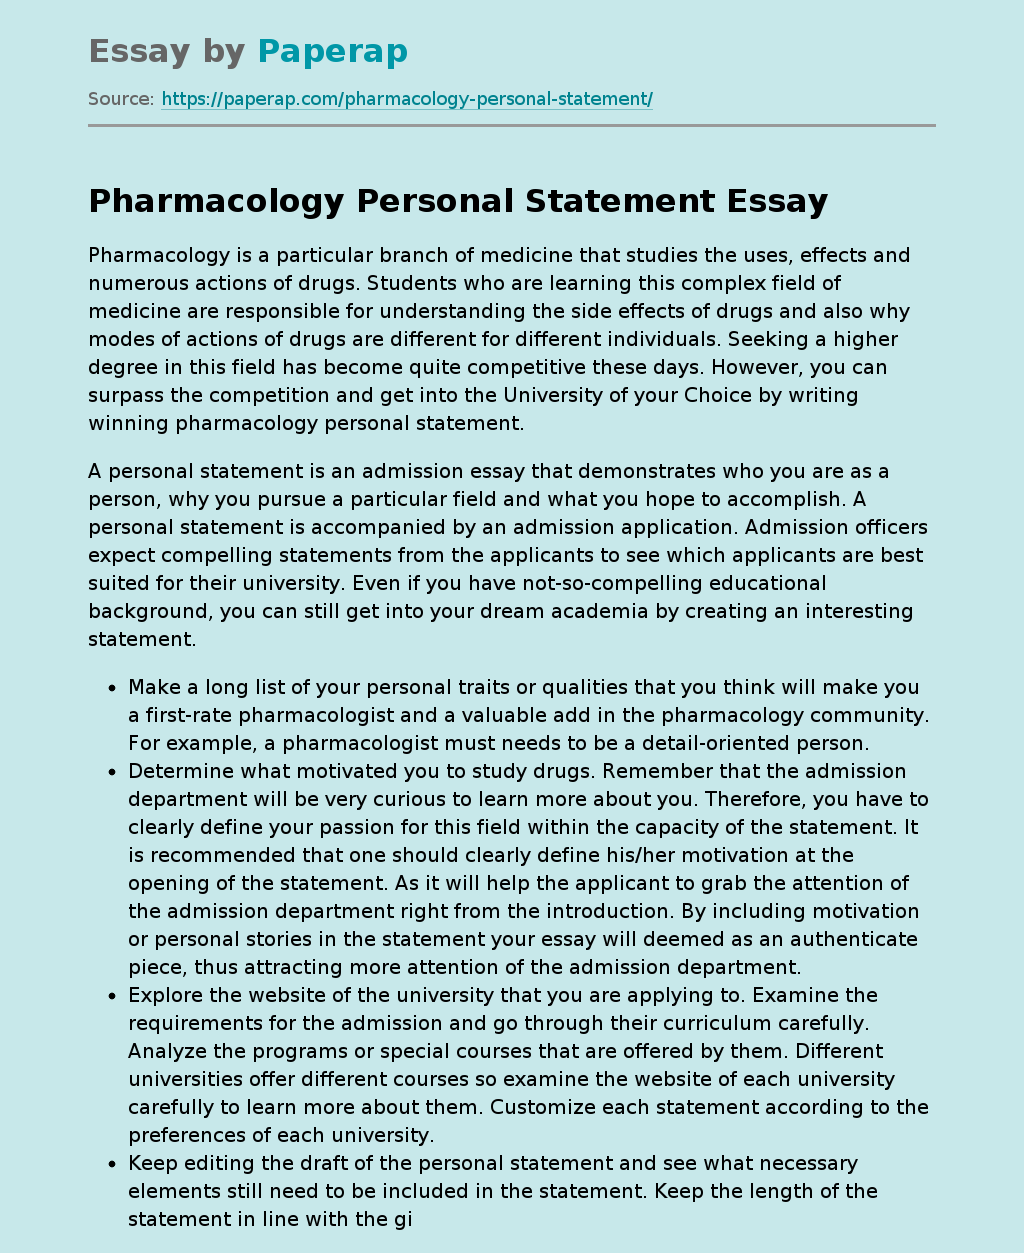 Pharmacology Personal Statement